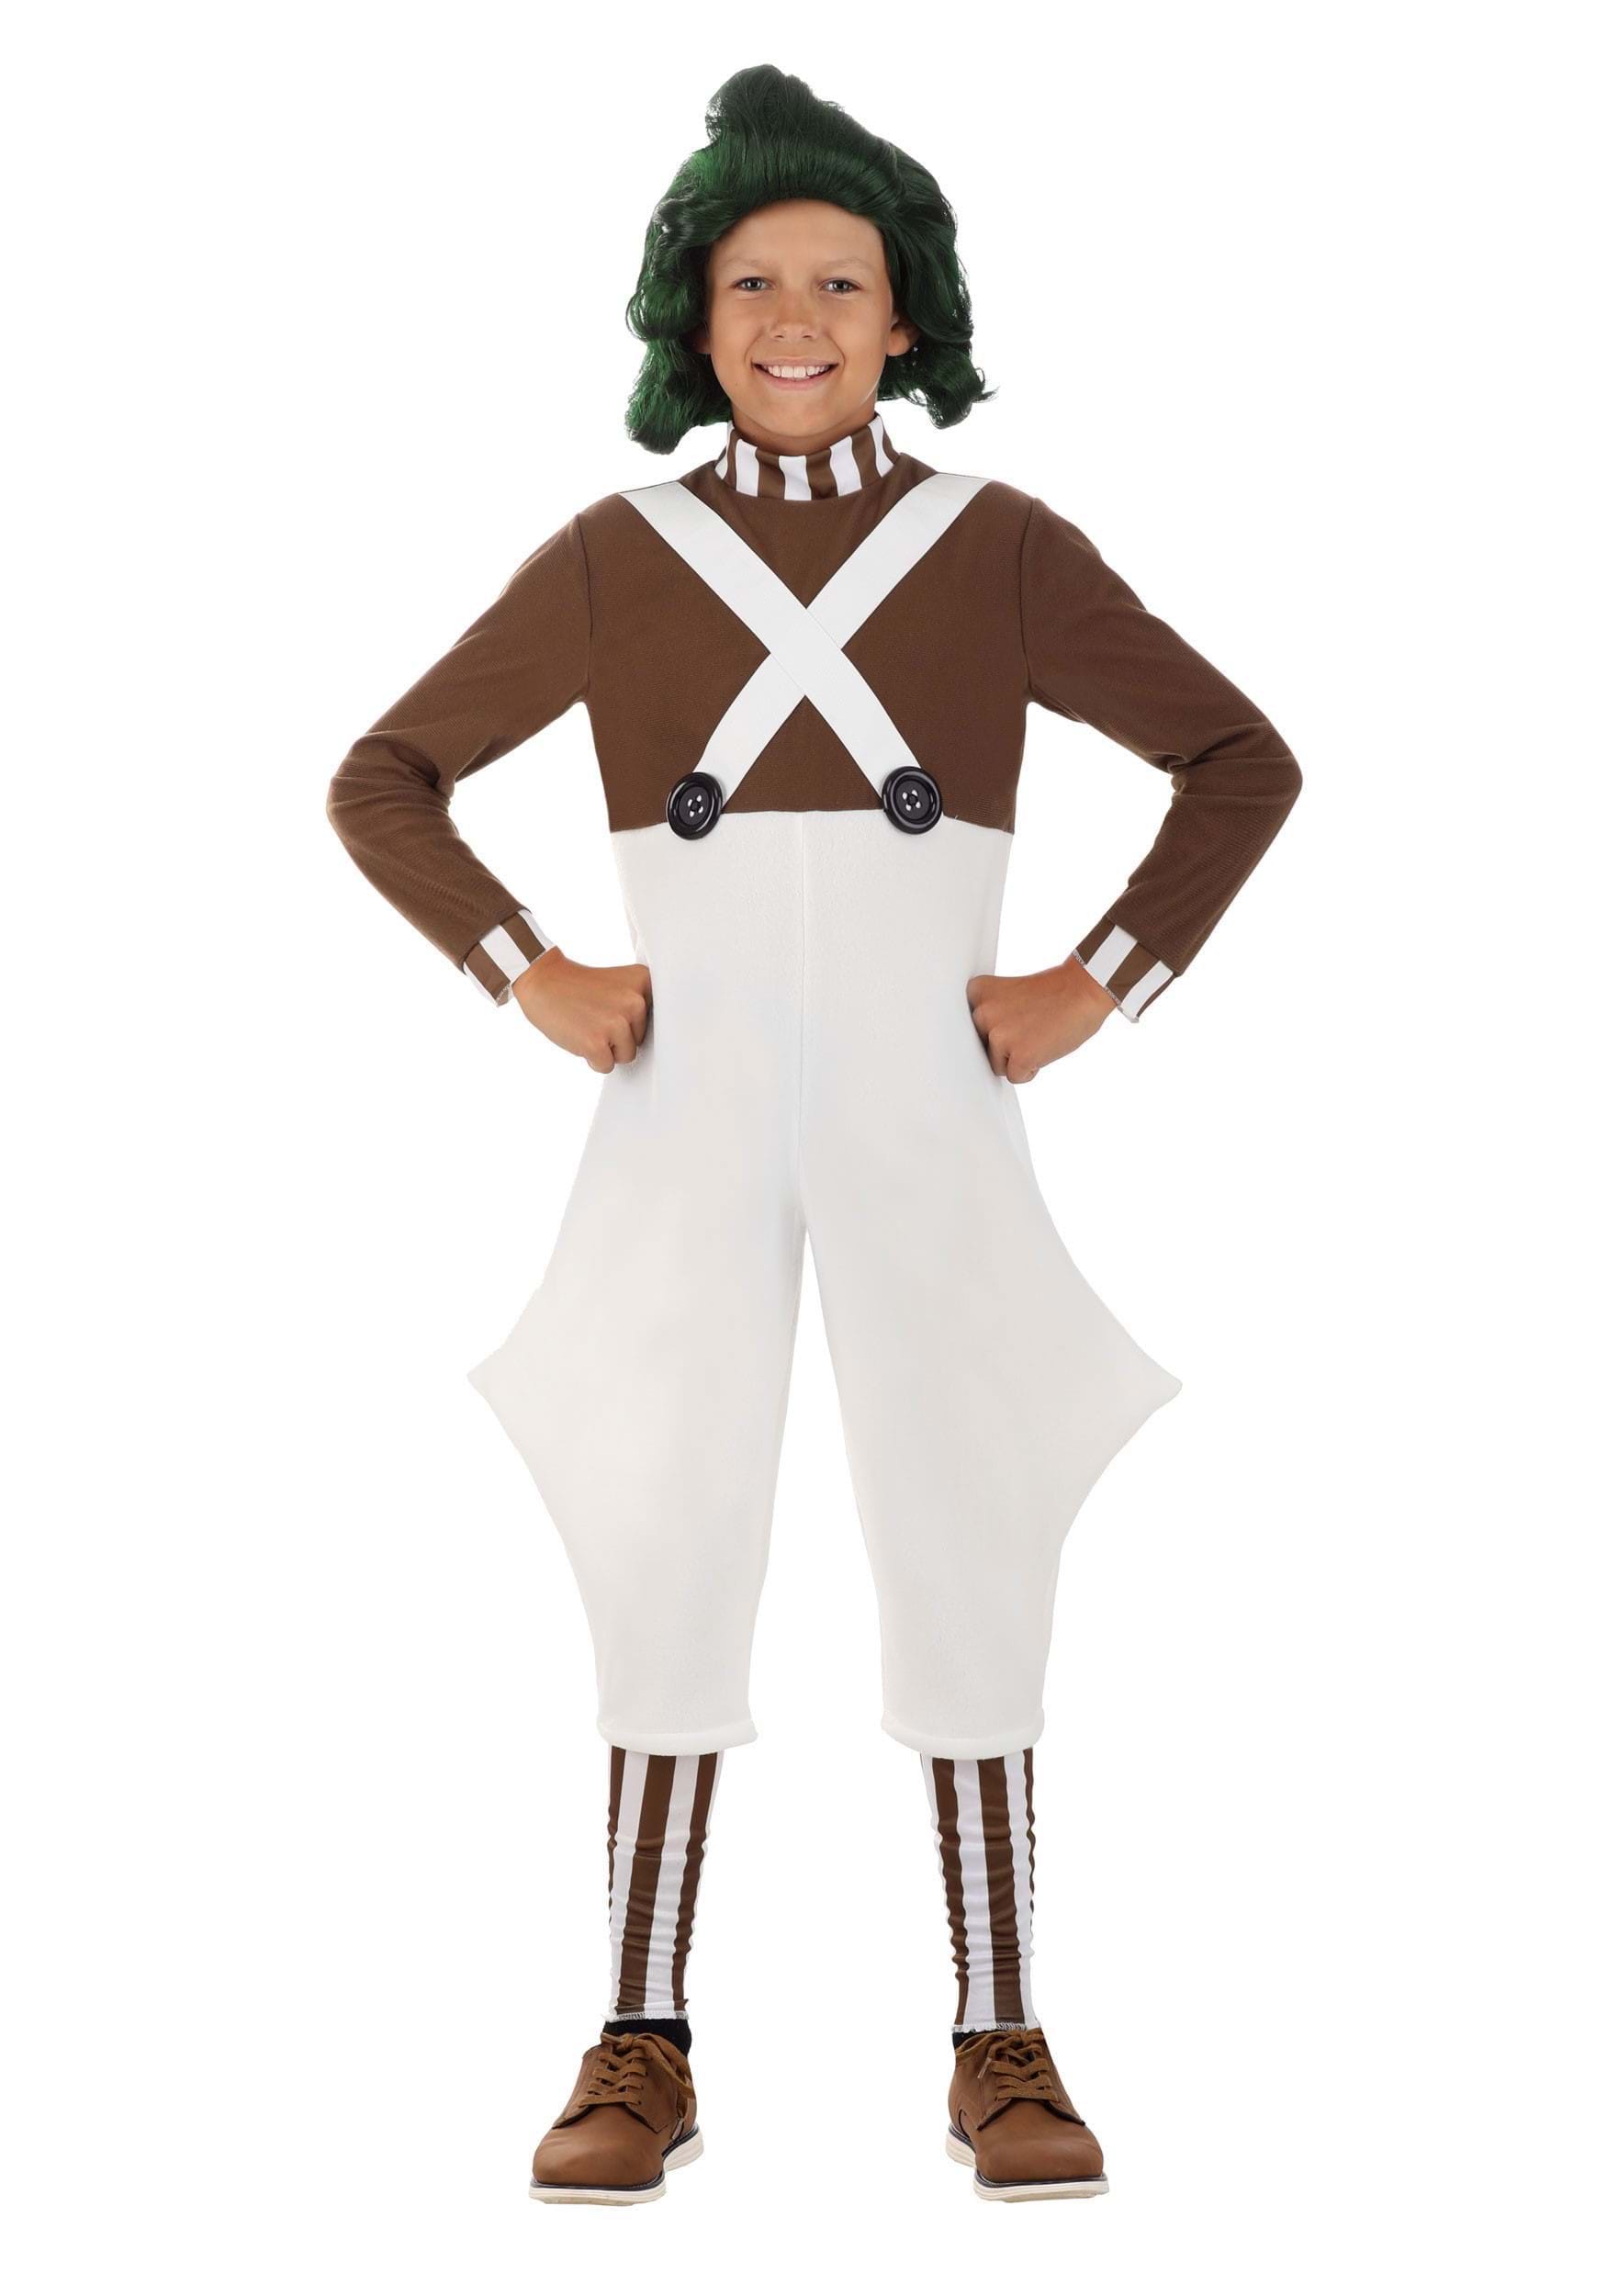 Photos - Fancy Dress Jerry Leigh Willy Wonka Child Oompa Loompa Costume Brown/White JLJLF10